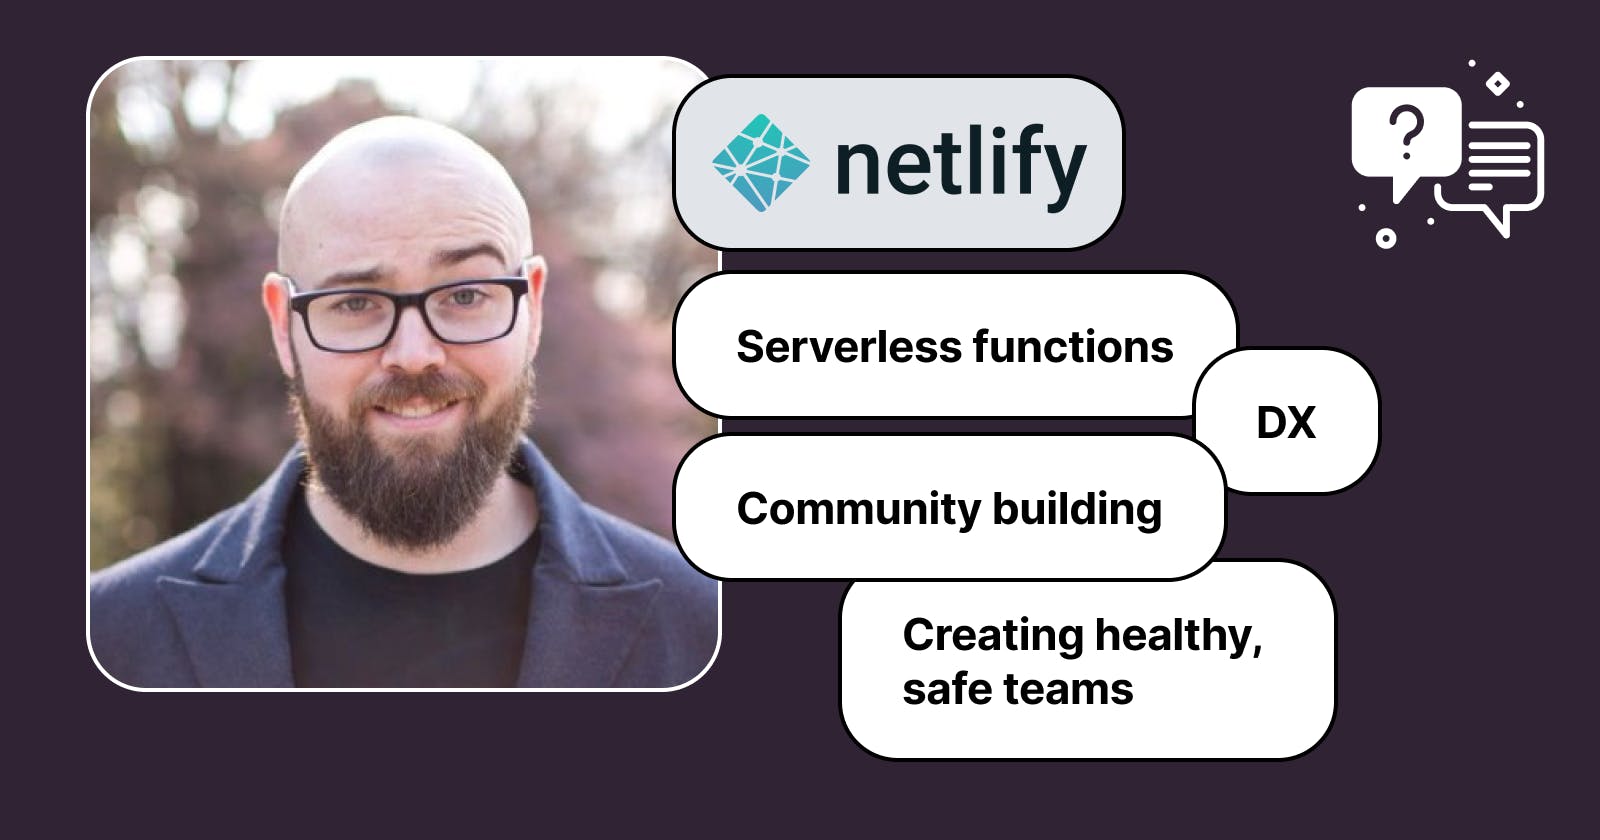 I'm Jason Lengstorf. I host a live pair programming show called Learn With Jason, I'm the VP of Developer Experience at Netlify. AMA!